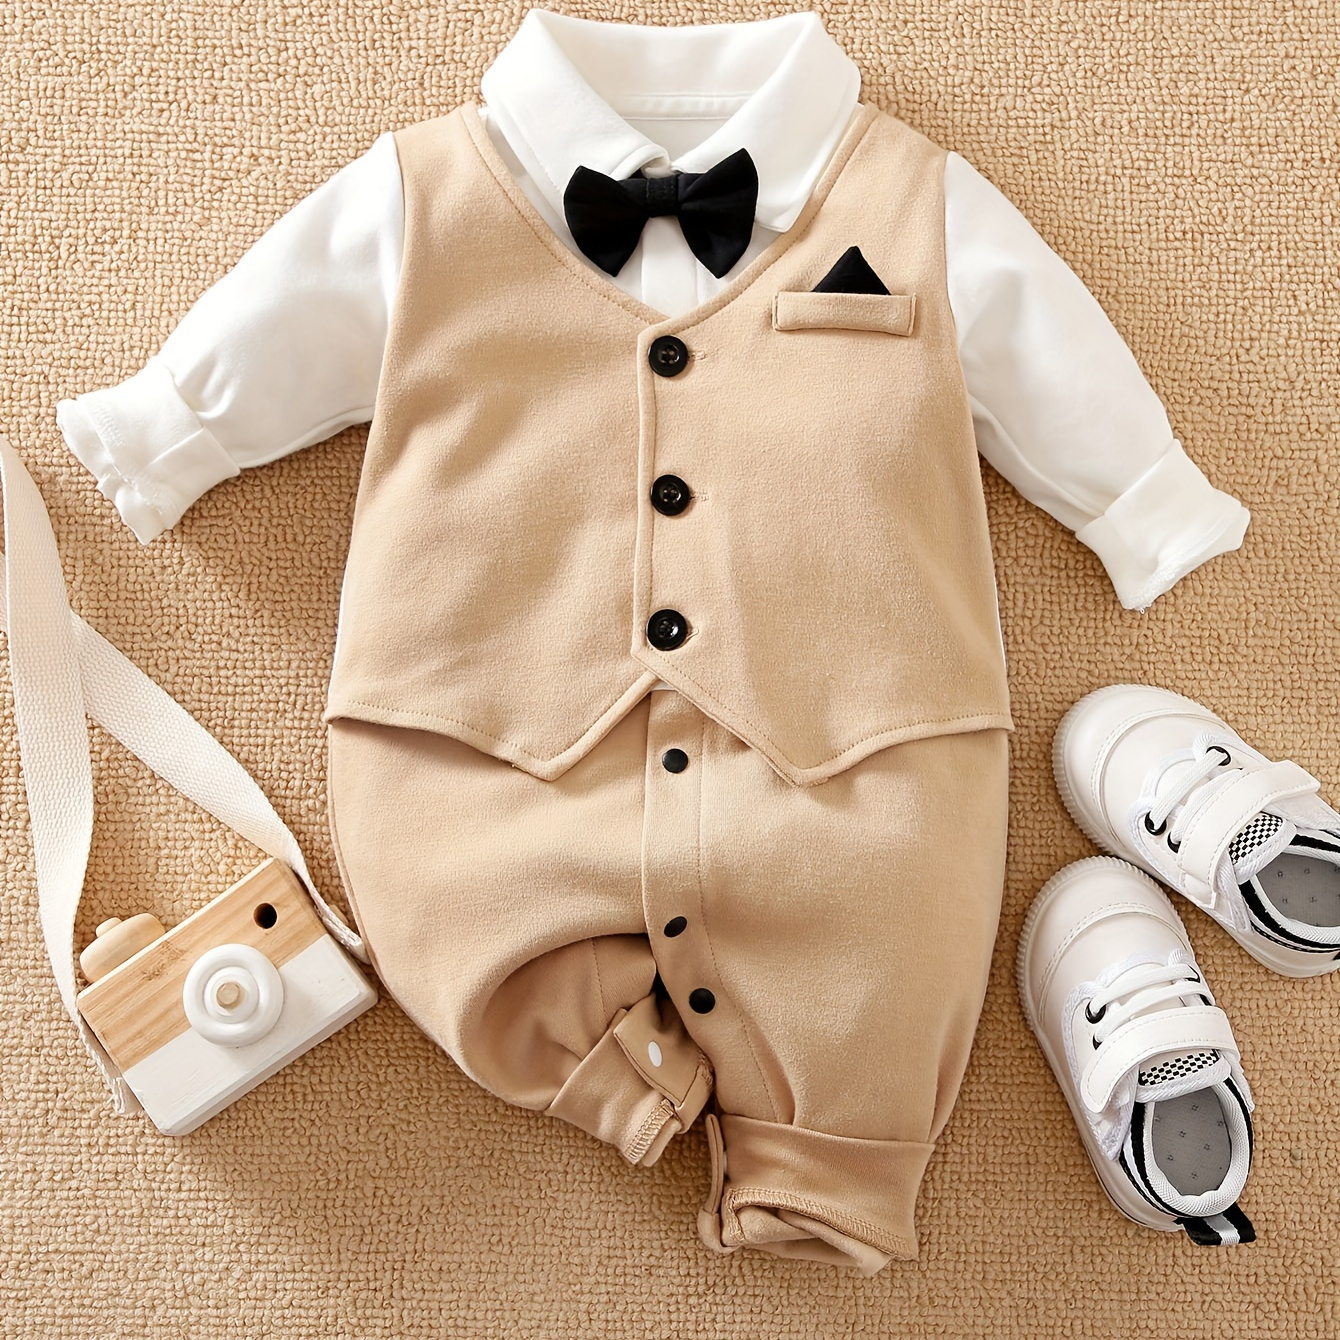 

Infant's Comfy Cotton Gentleman Bodysuit, Stylish Long Sleeve Onesie, Baby Boy's Clothing, As Gift